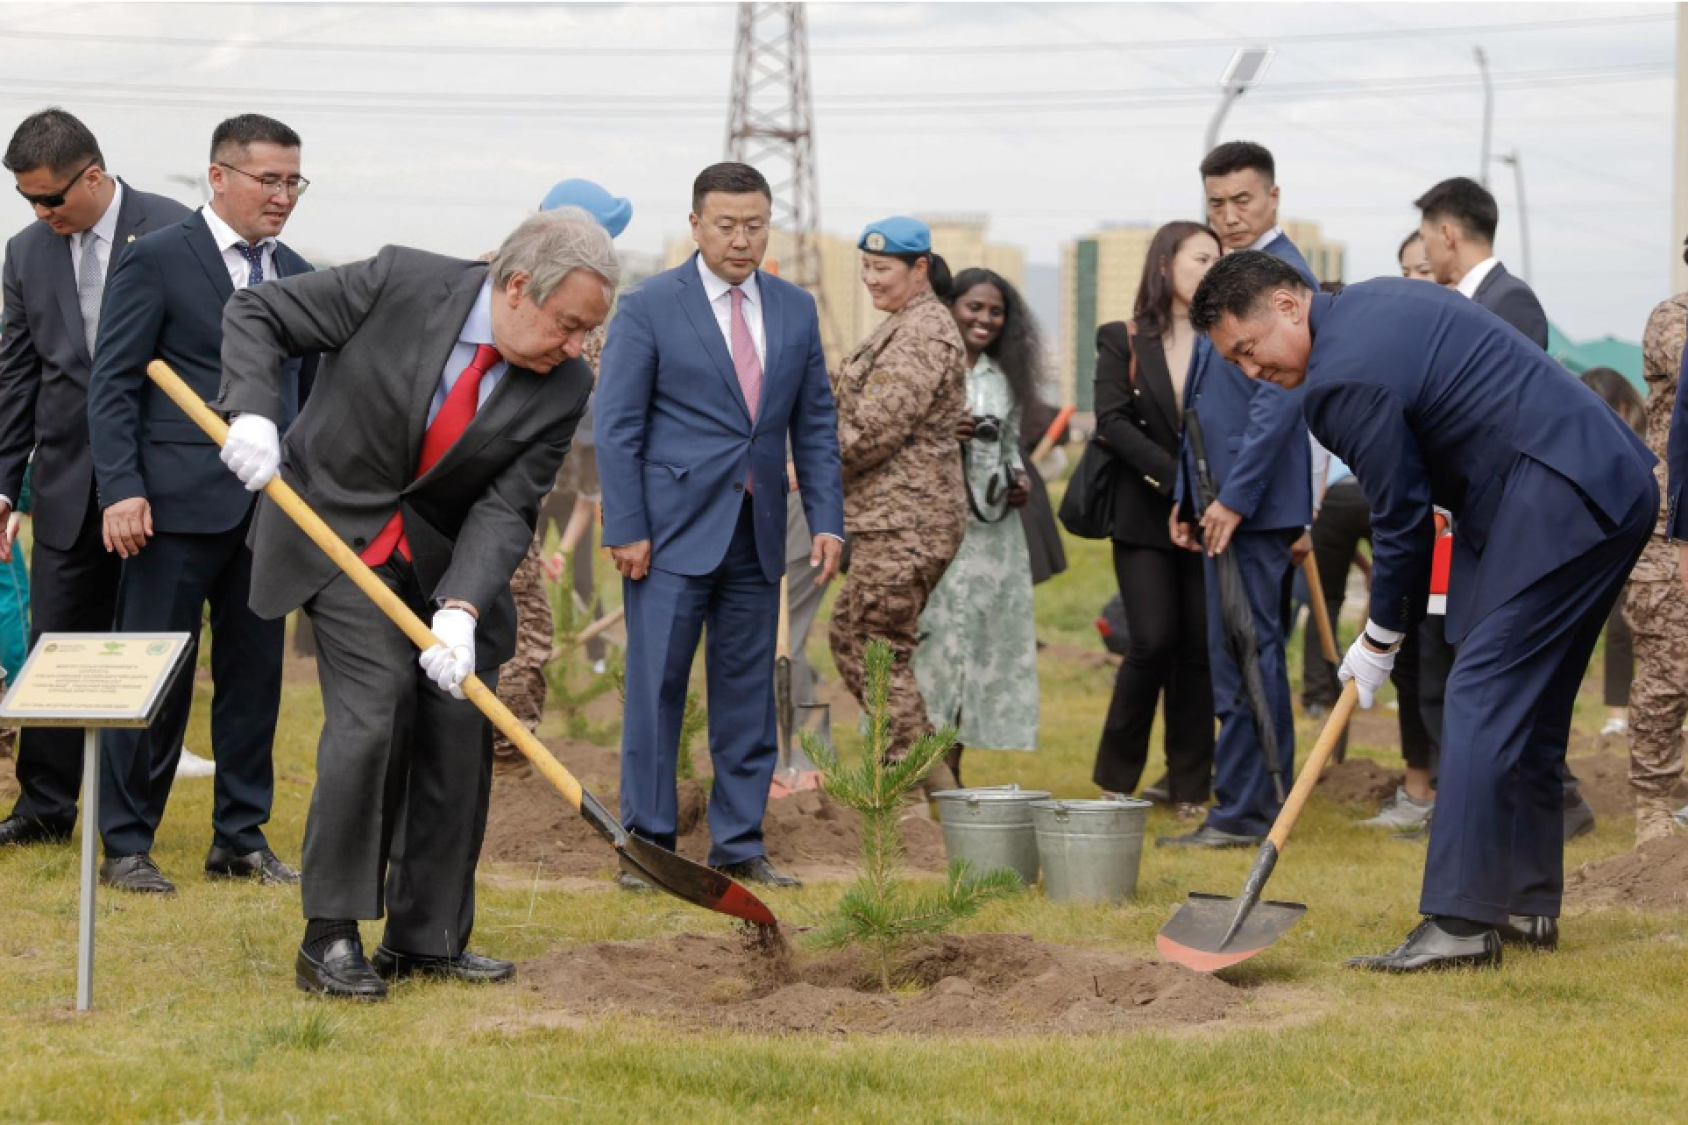 UN Chief and the President of Mongolia at the tree planting ceremony.